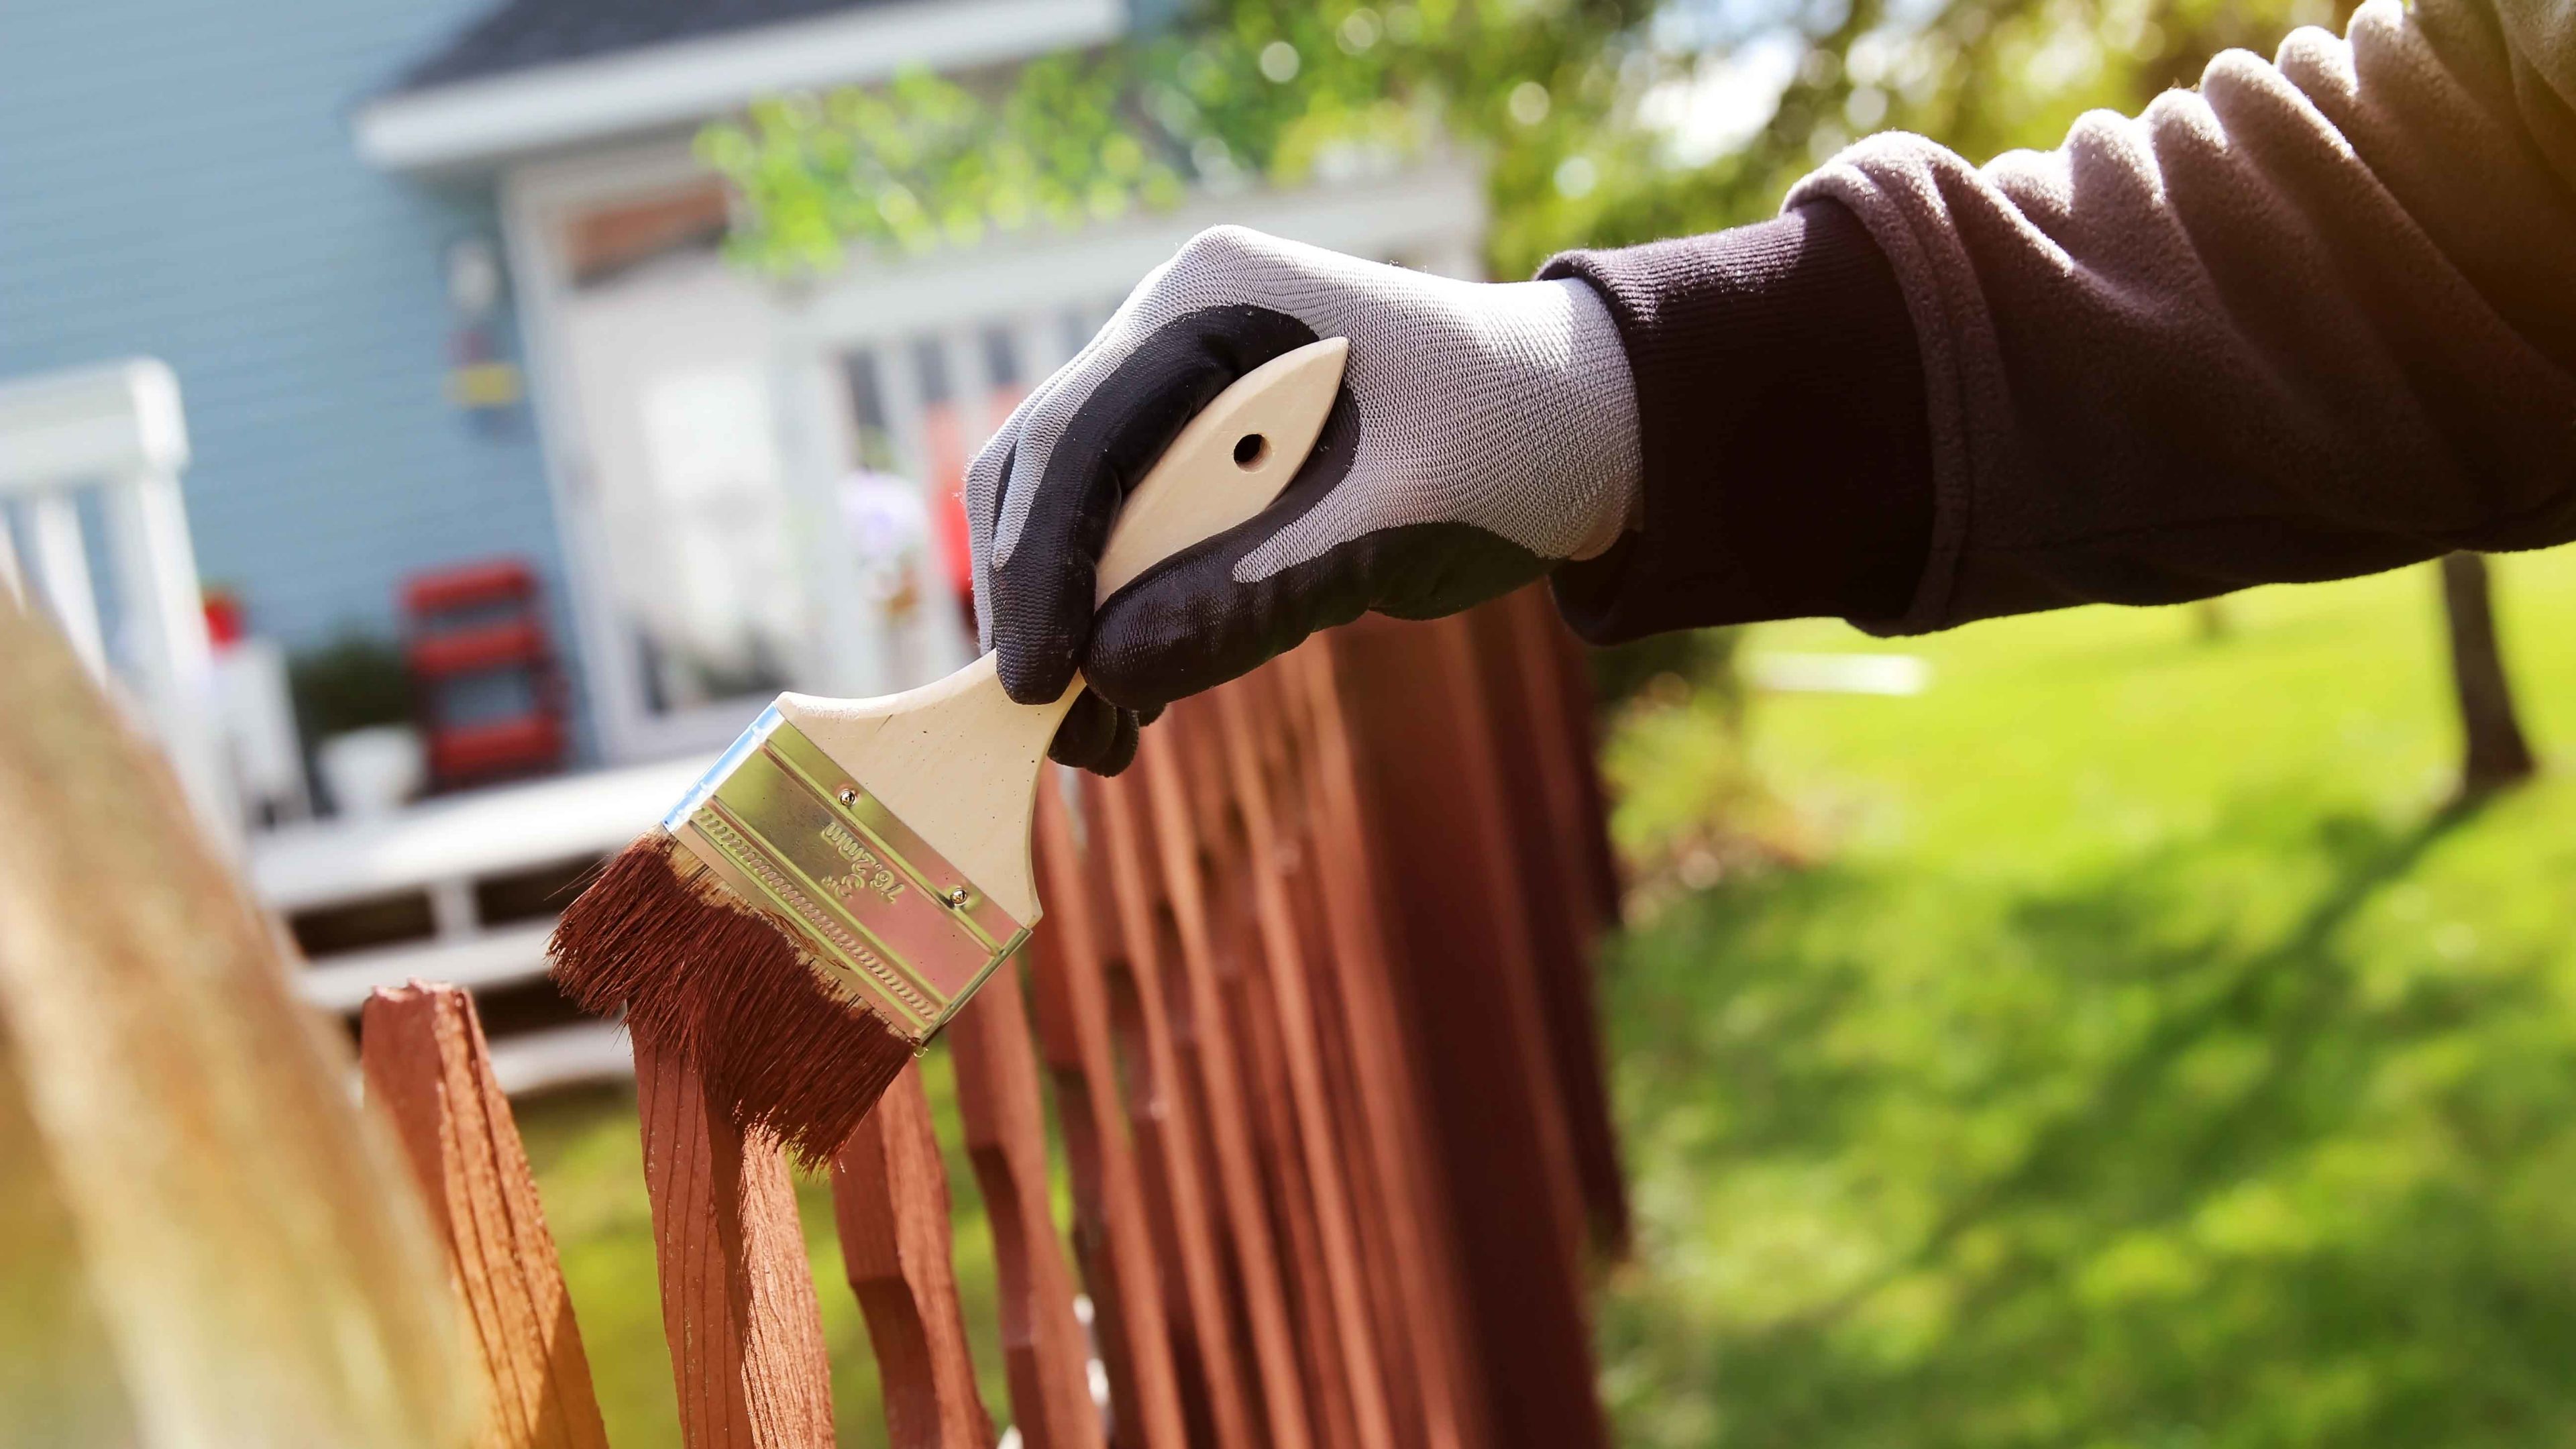 Adding a fresh coat of paint to fences is an easy project to transform your backyard.